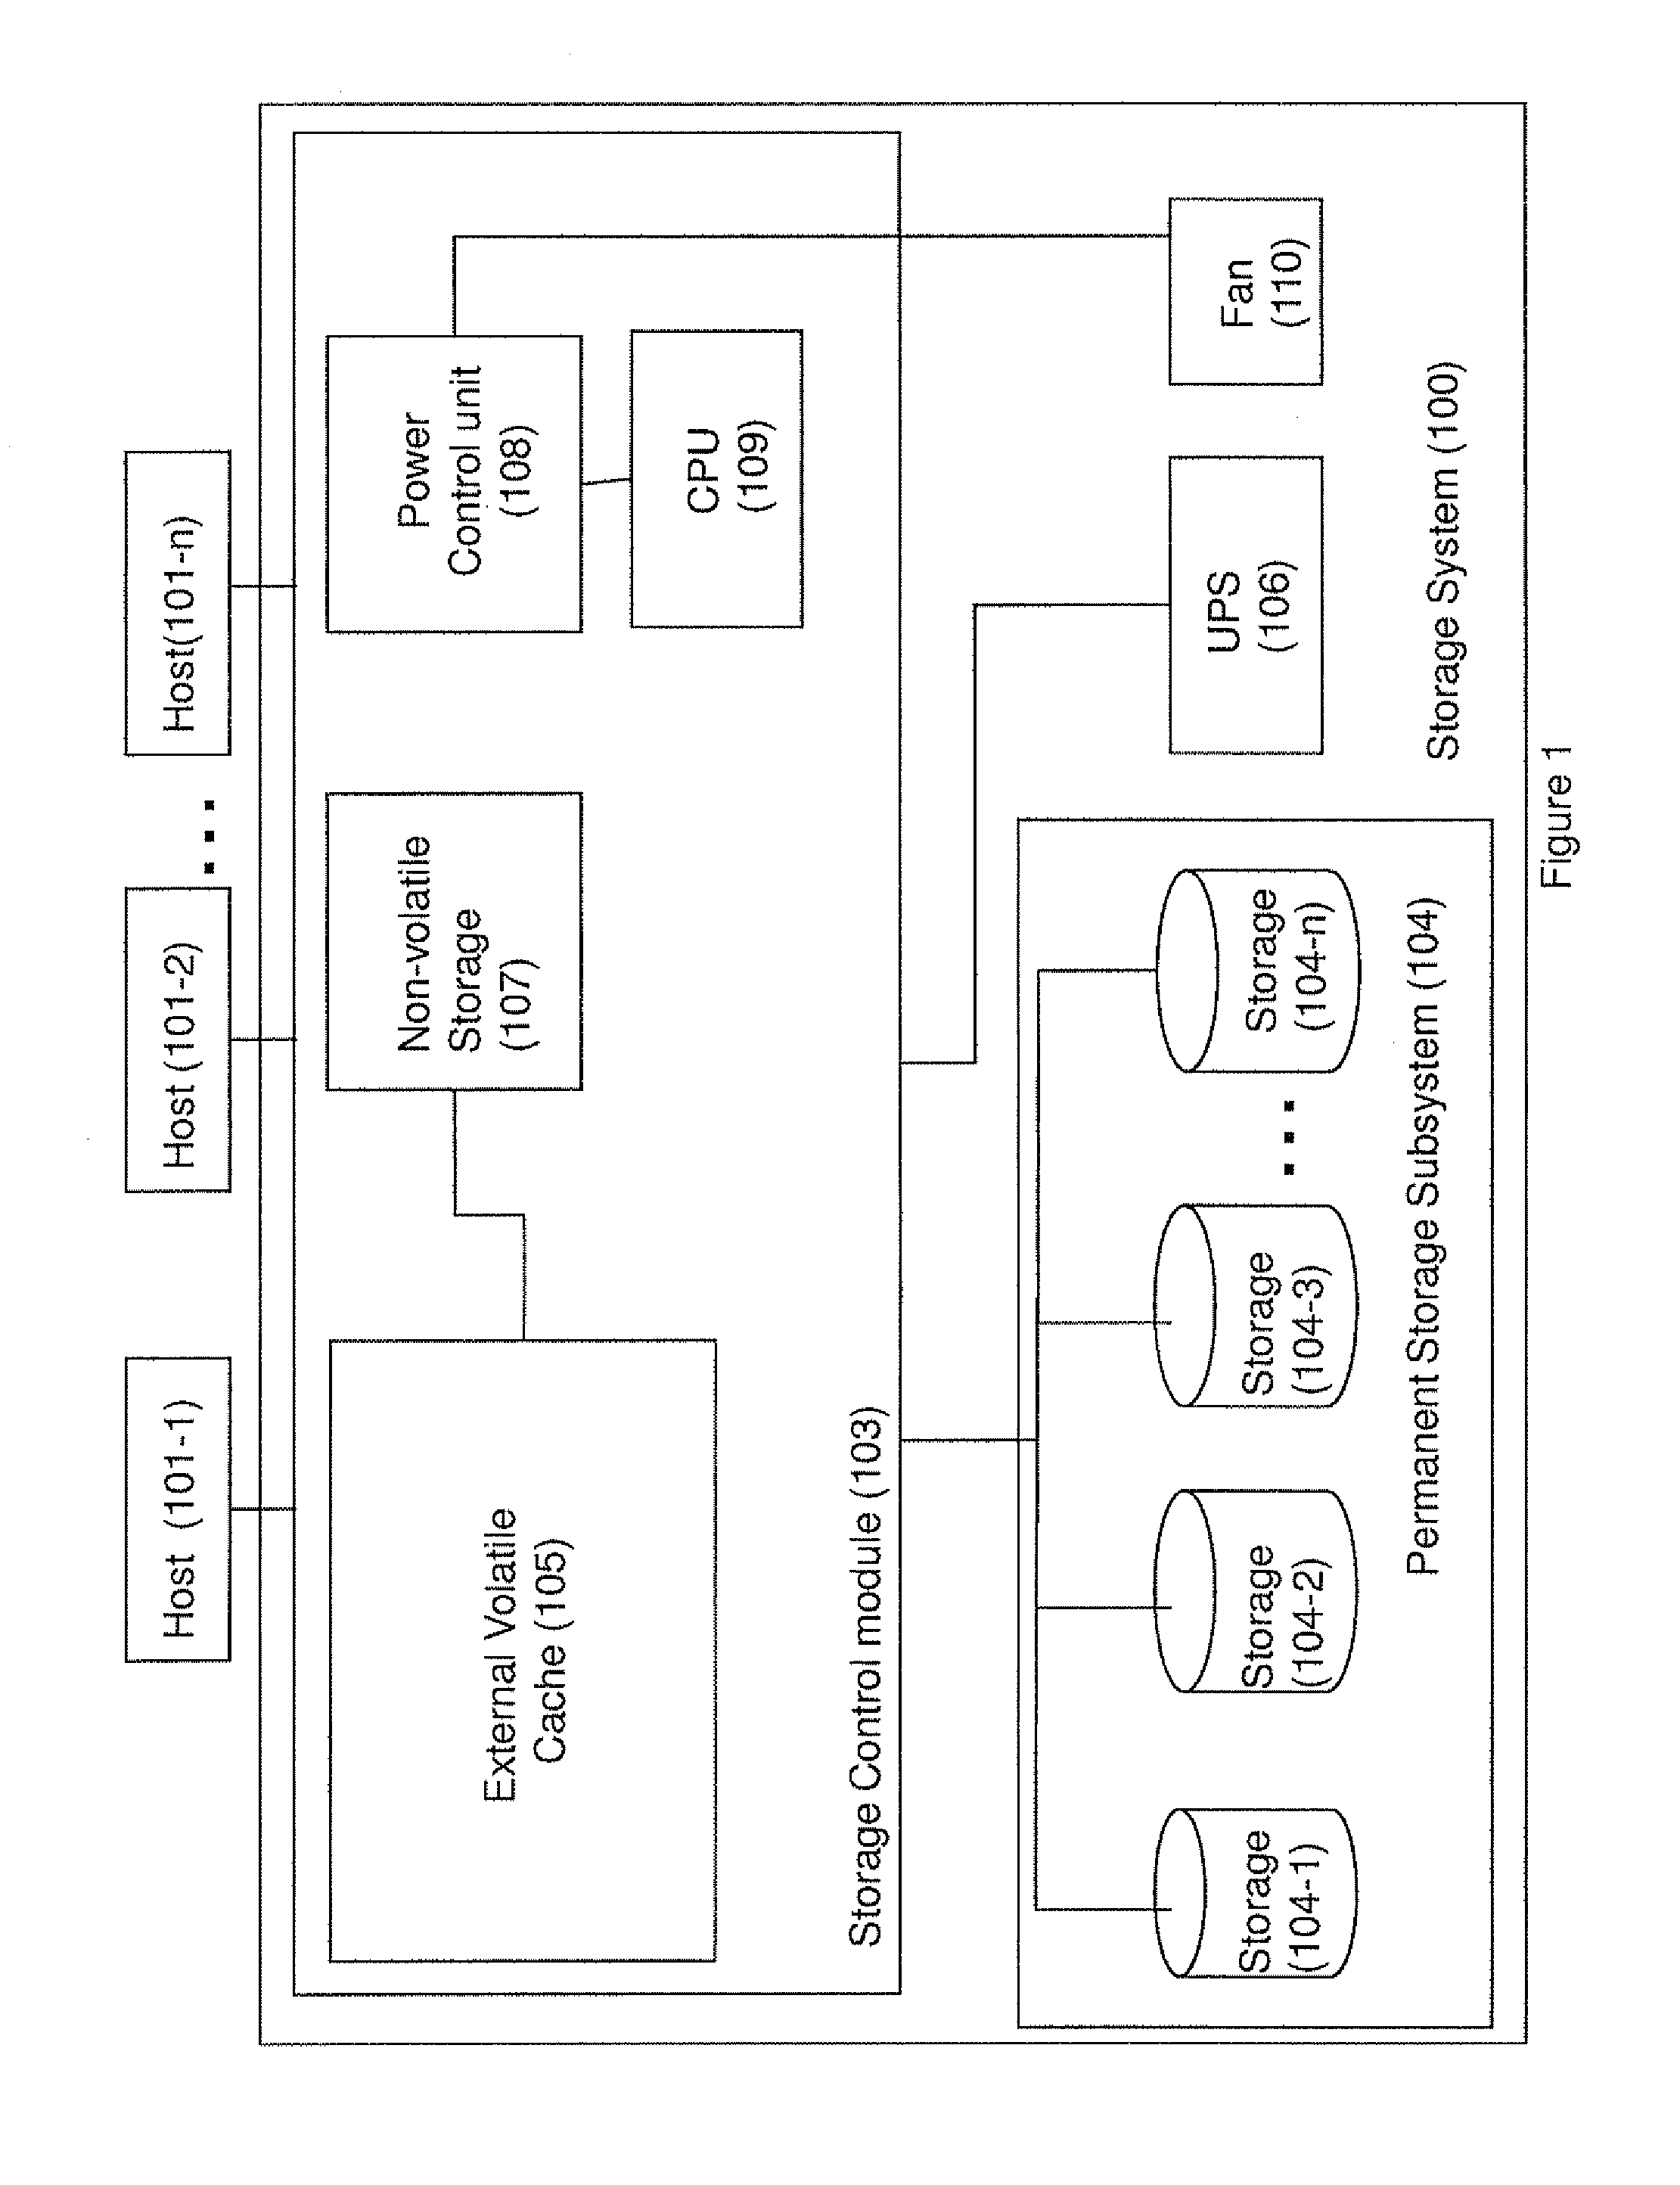 Method and system for reducing power consumption of peripherals in an emergency shut-down